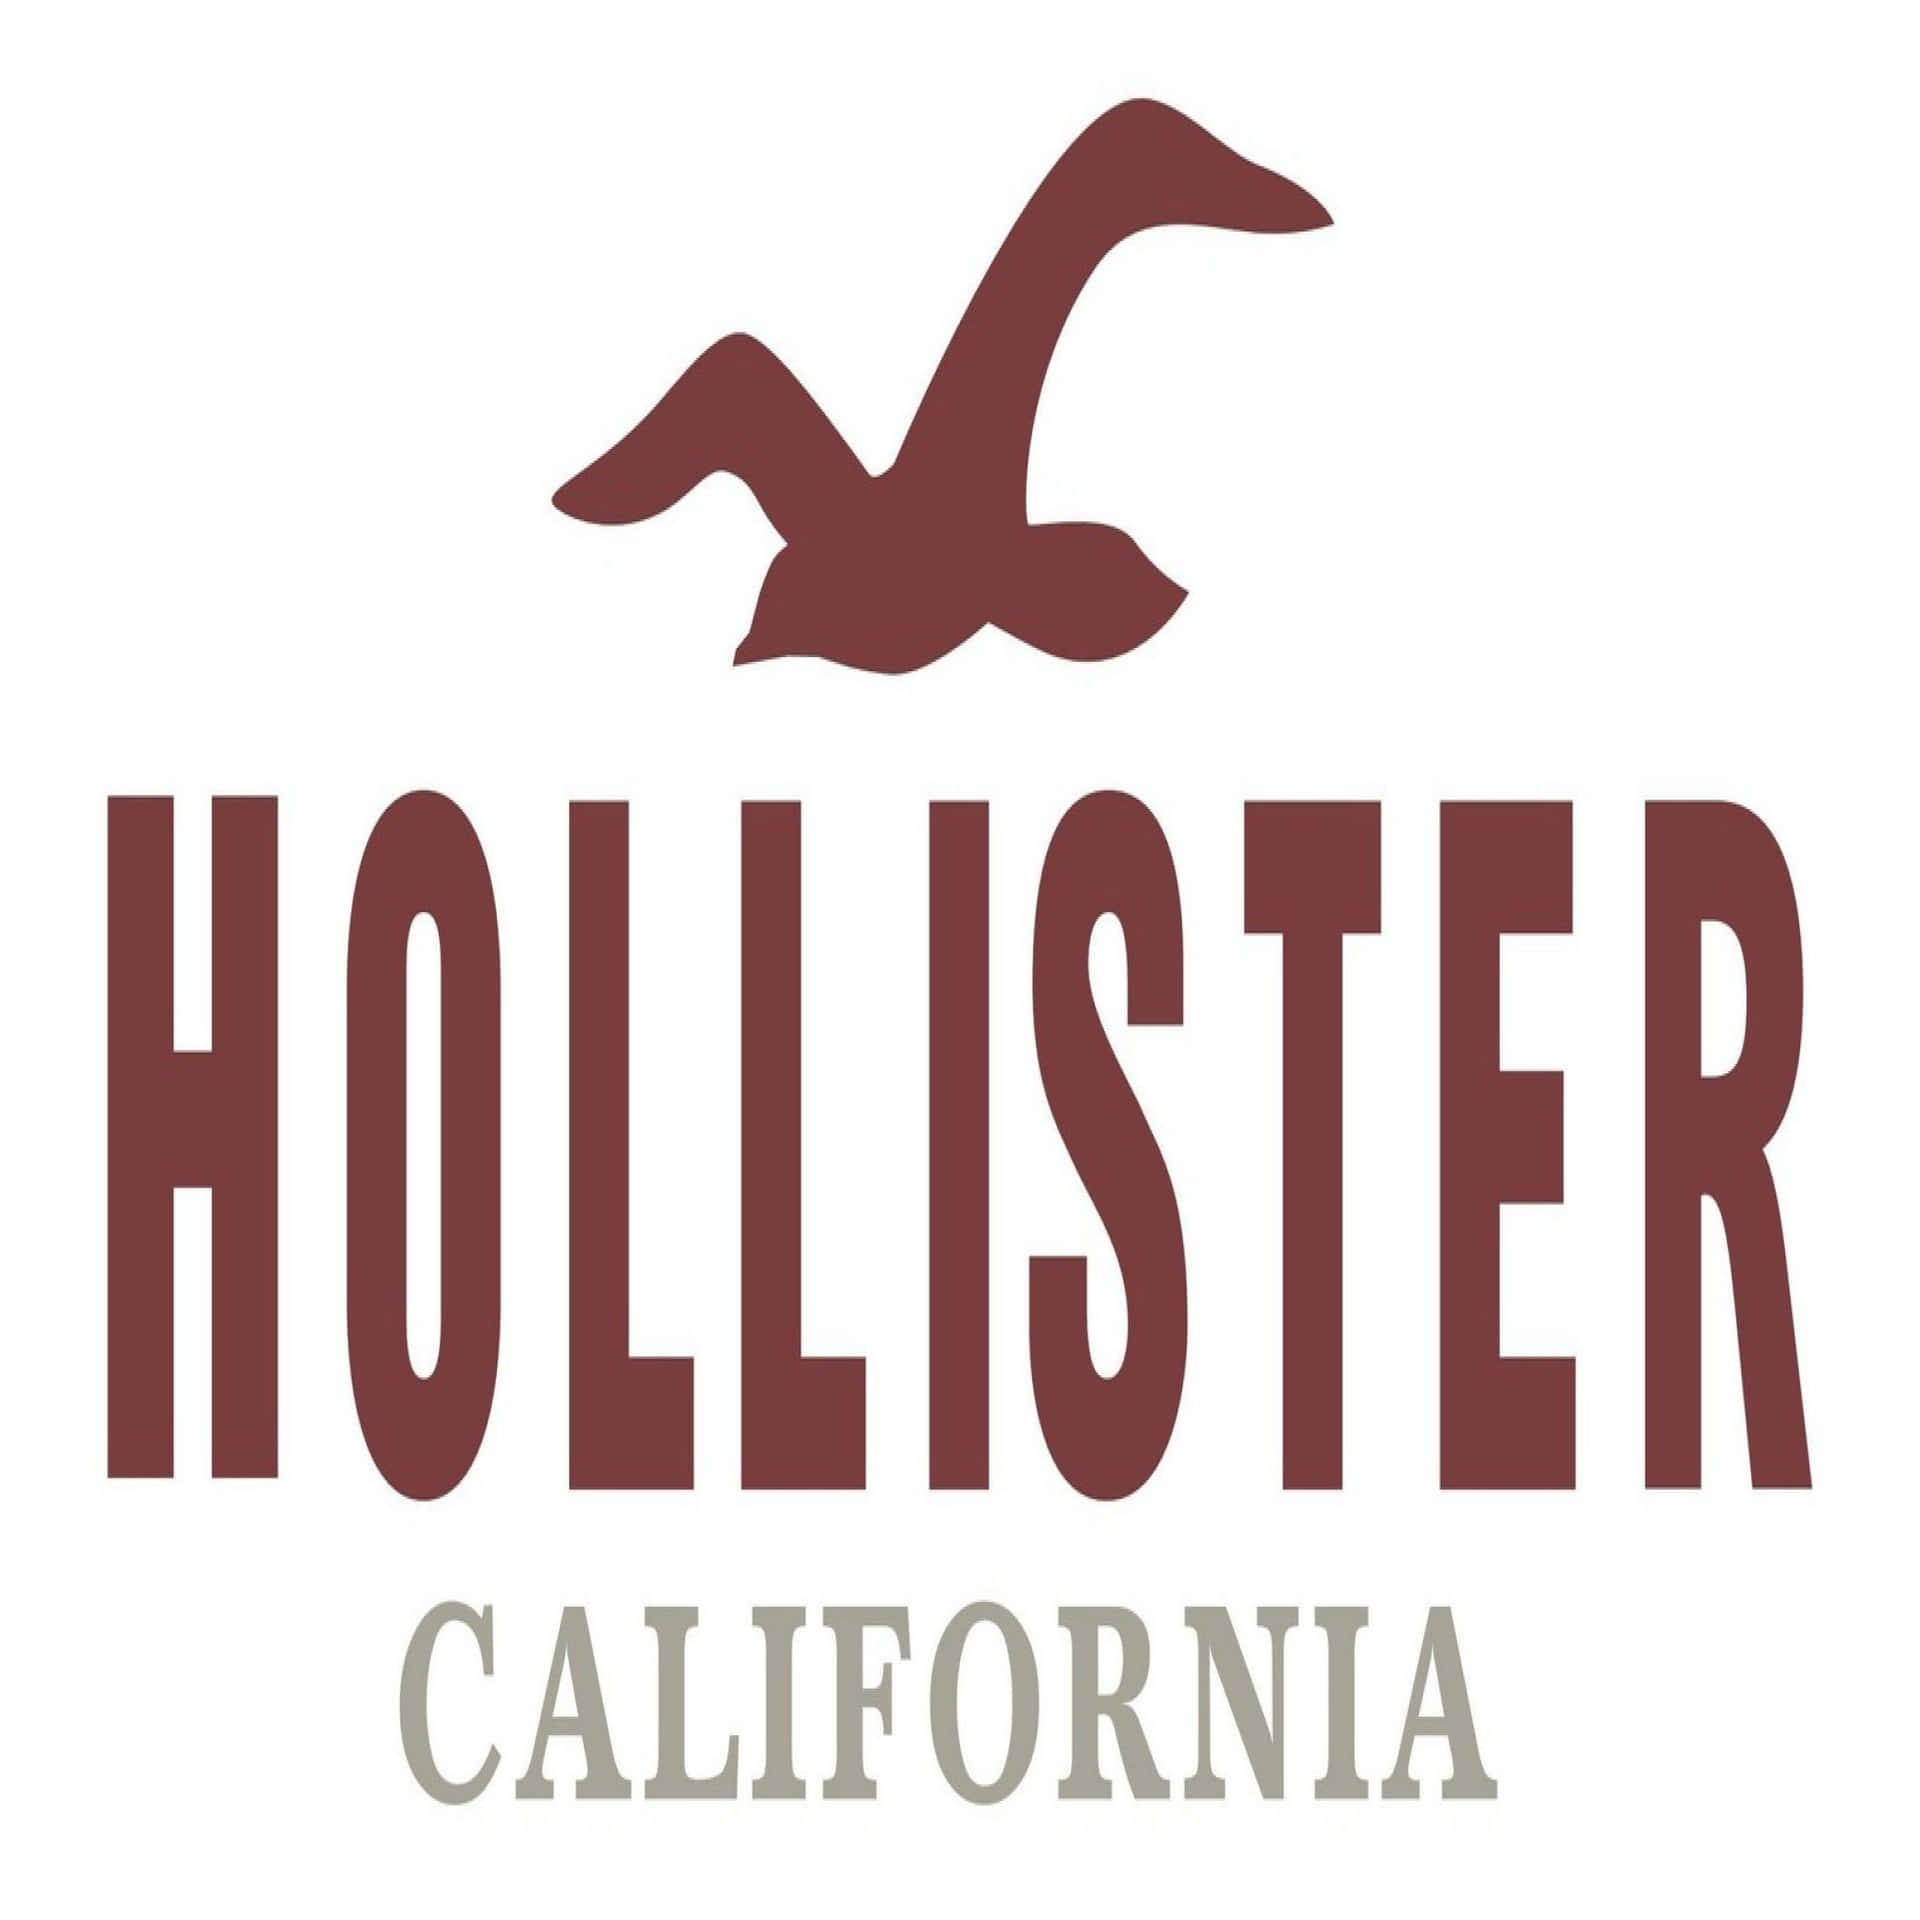 Download Live life with an ocean view from Hollister | Wallpapers.com